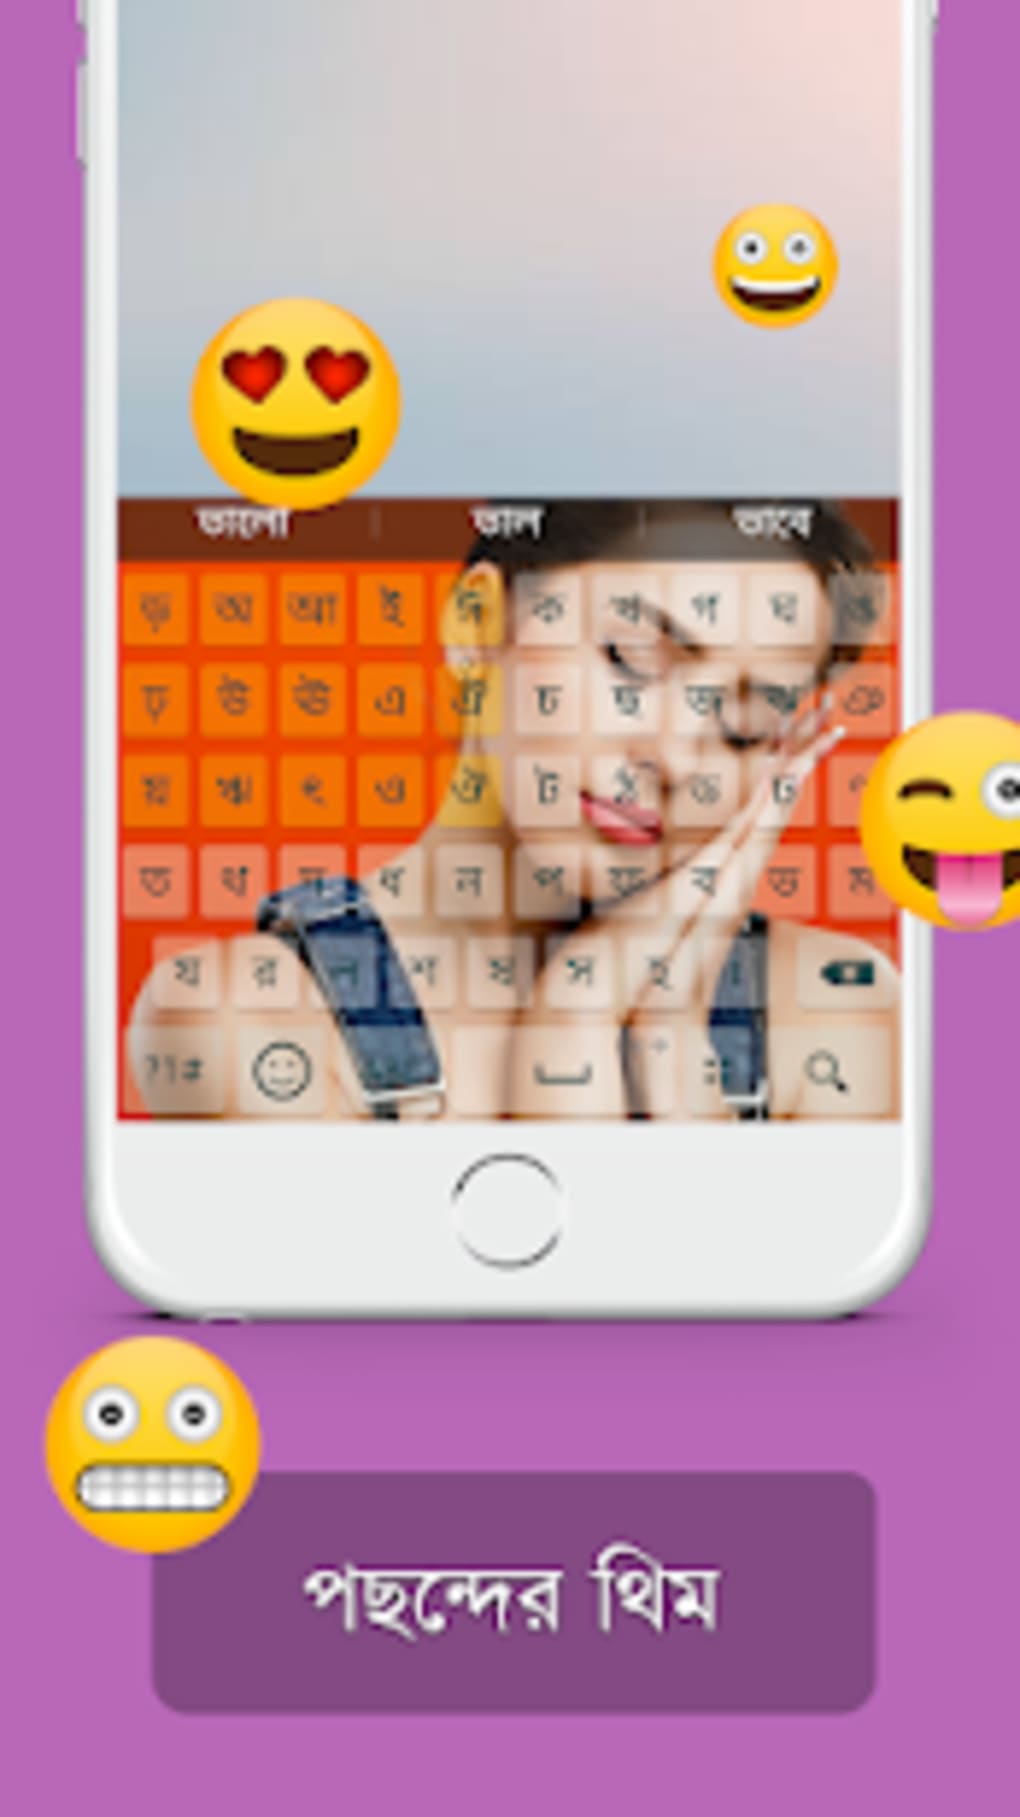 bangla keyboard in android